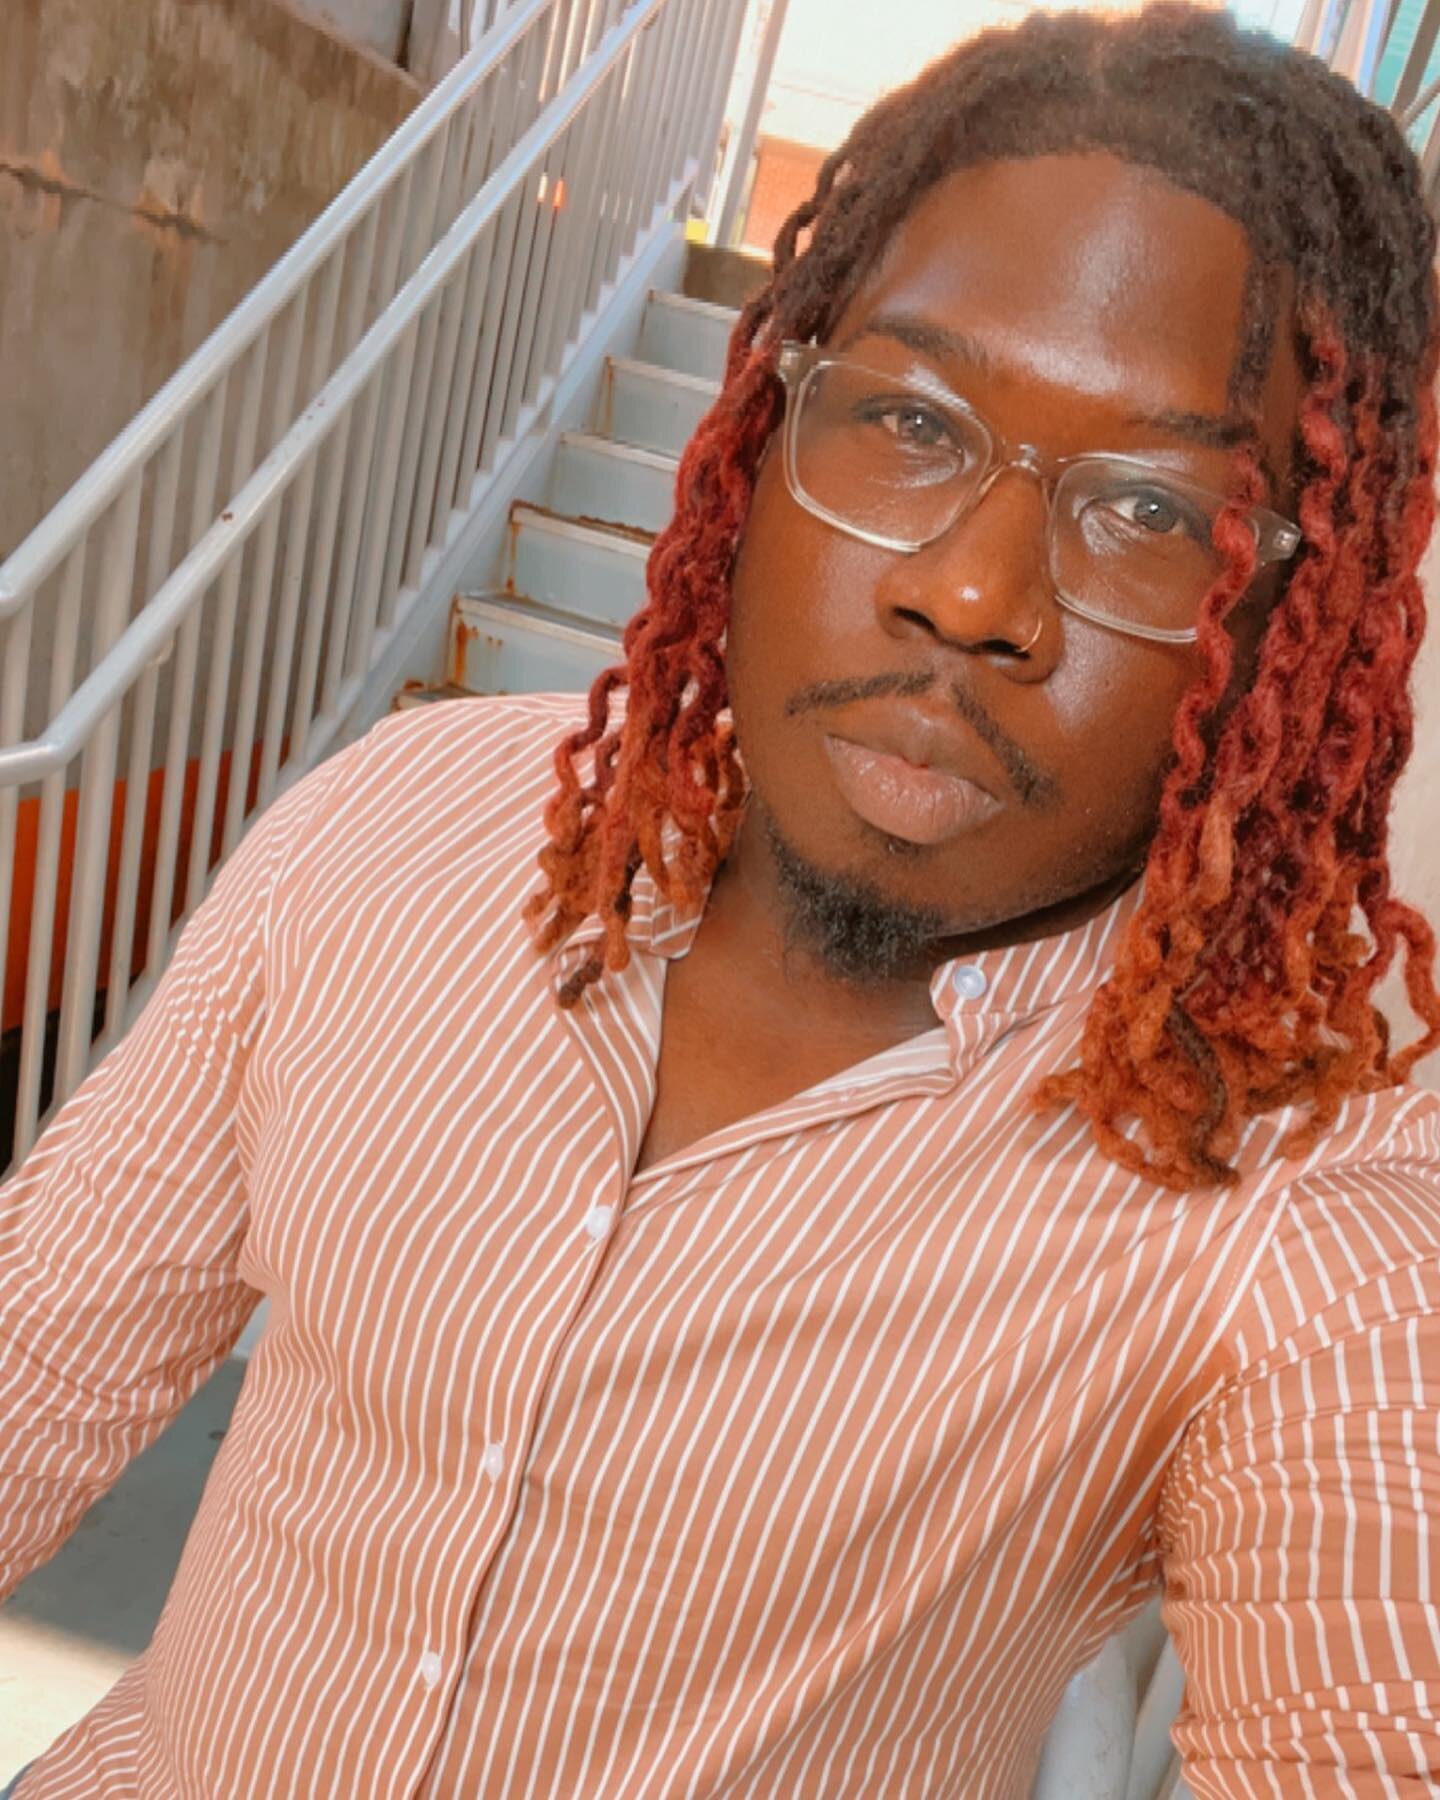 Keep your style on point and your head up high. You never know who you'll inspire today!

#inspire #styledbyfashionmr #lookgoodfeelgood #smize #styleinspo #blessed #lovingme #dreadhead #walkinpurpose #atl